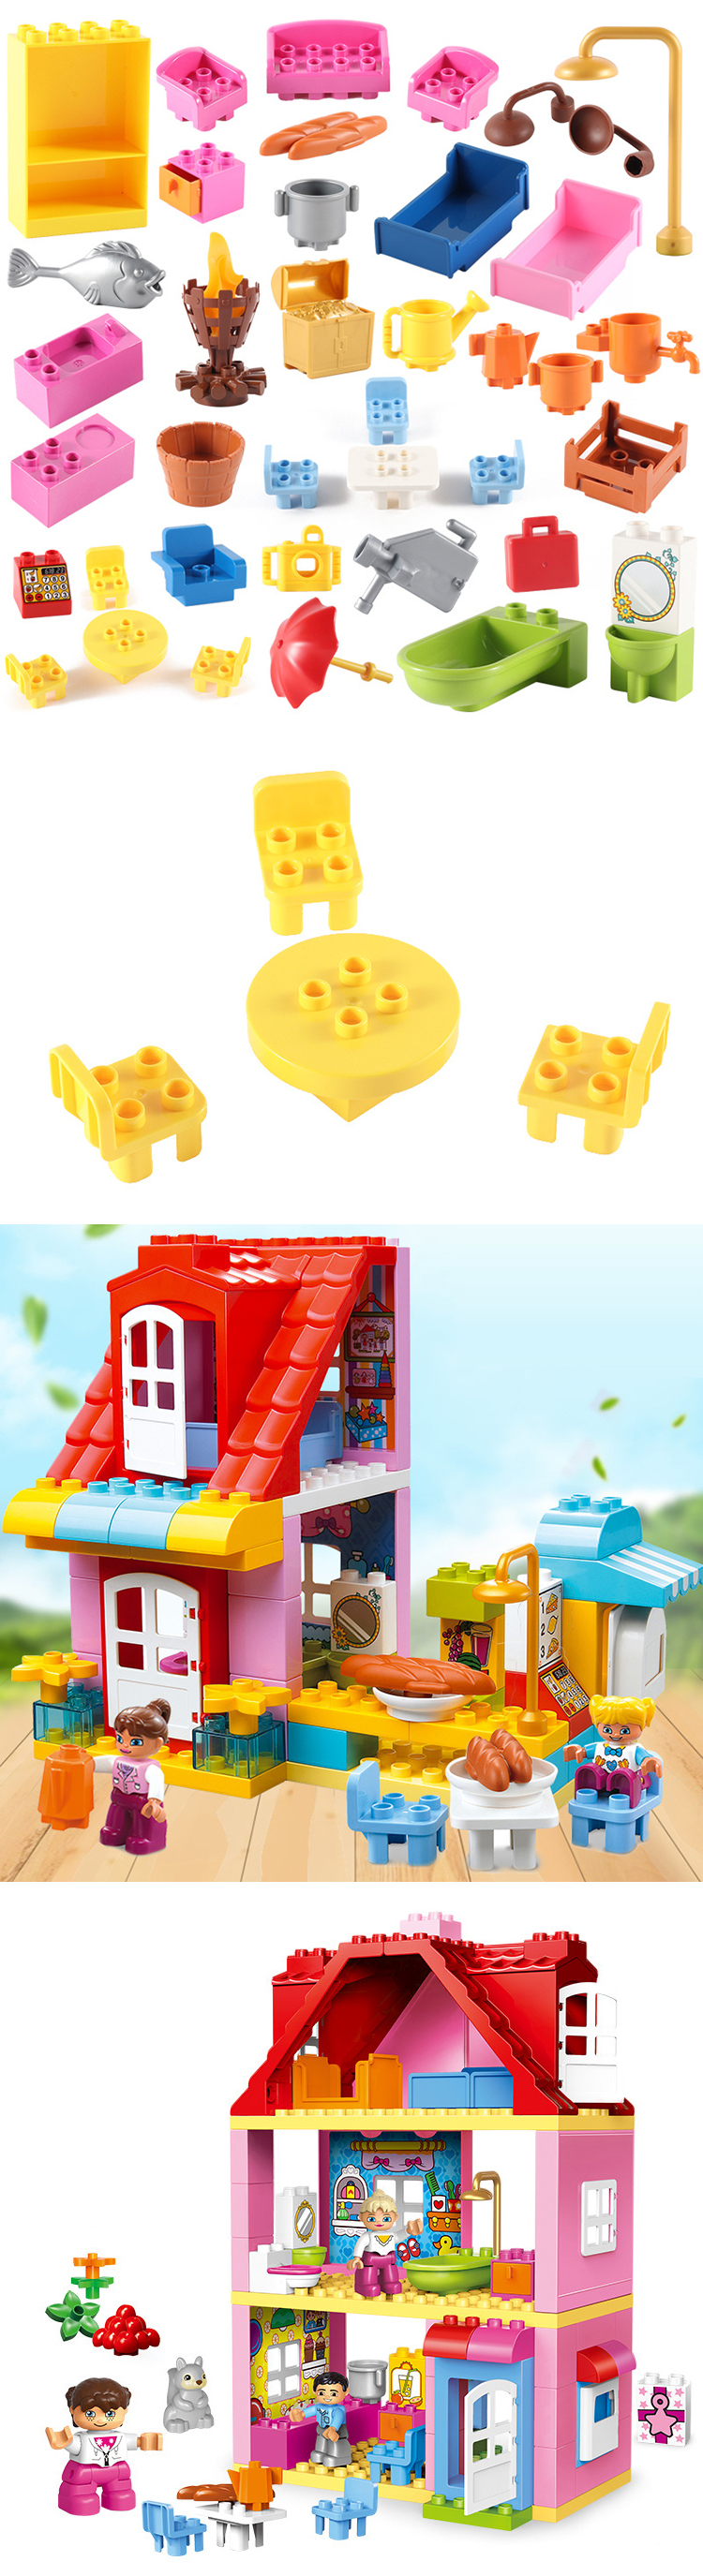 WOMA TOYS Compatible Major Brands Bricks Age 3+ Big Building Blocks House Tables chairs Daily necessities model Toy Accessories